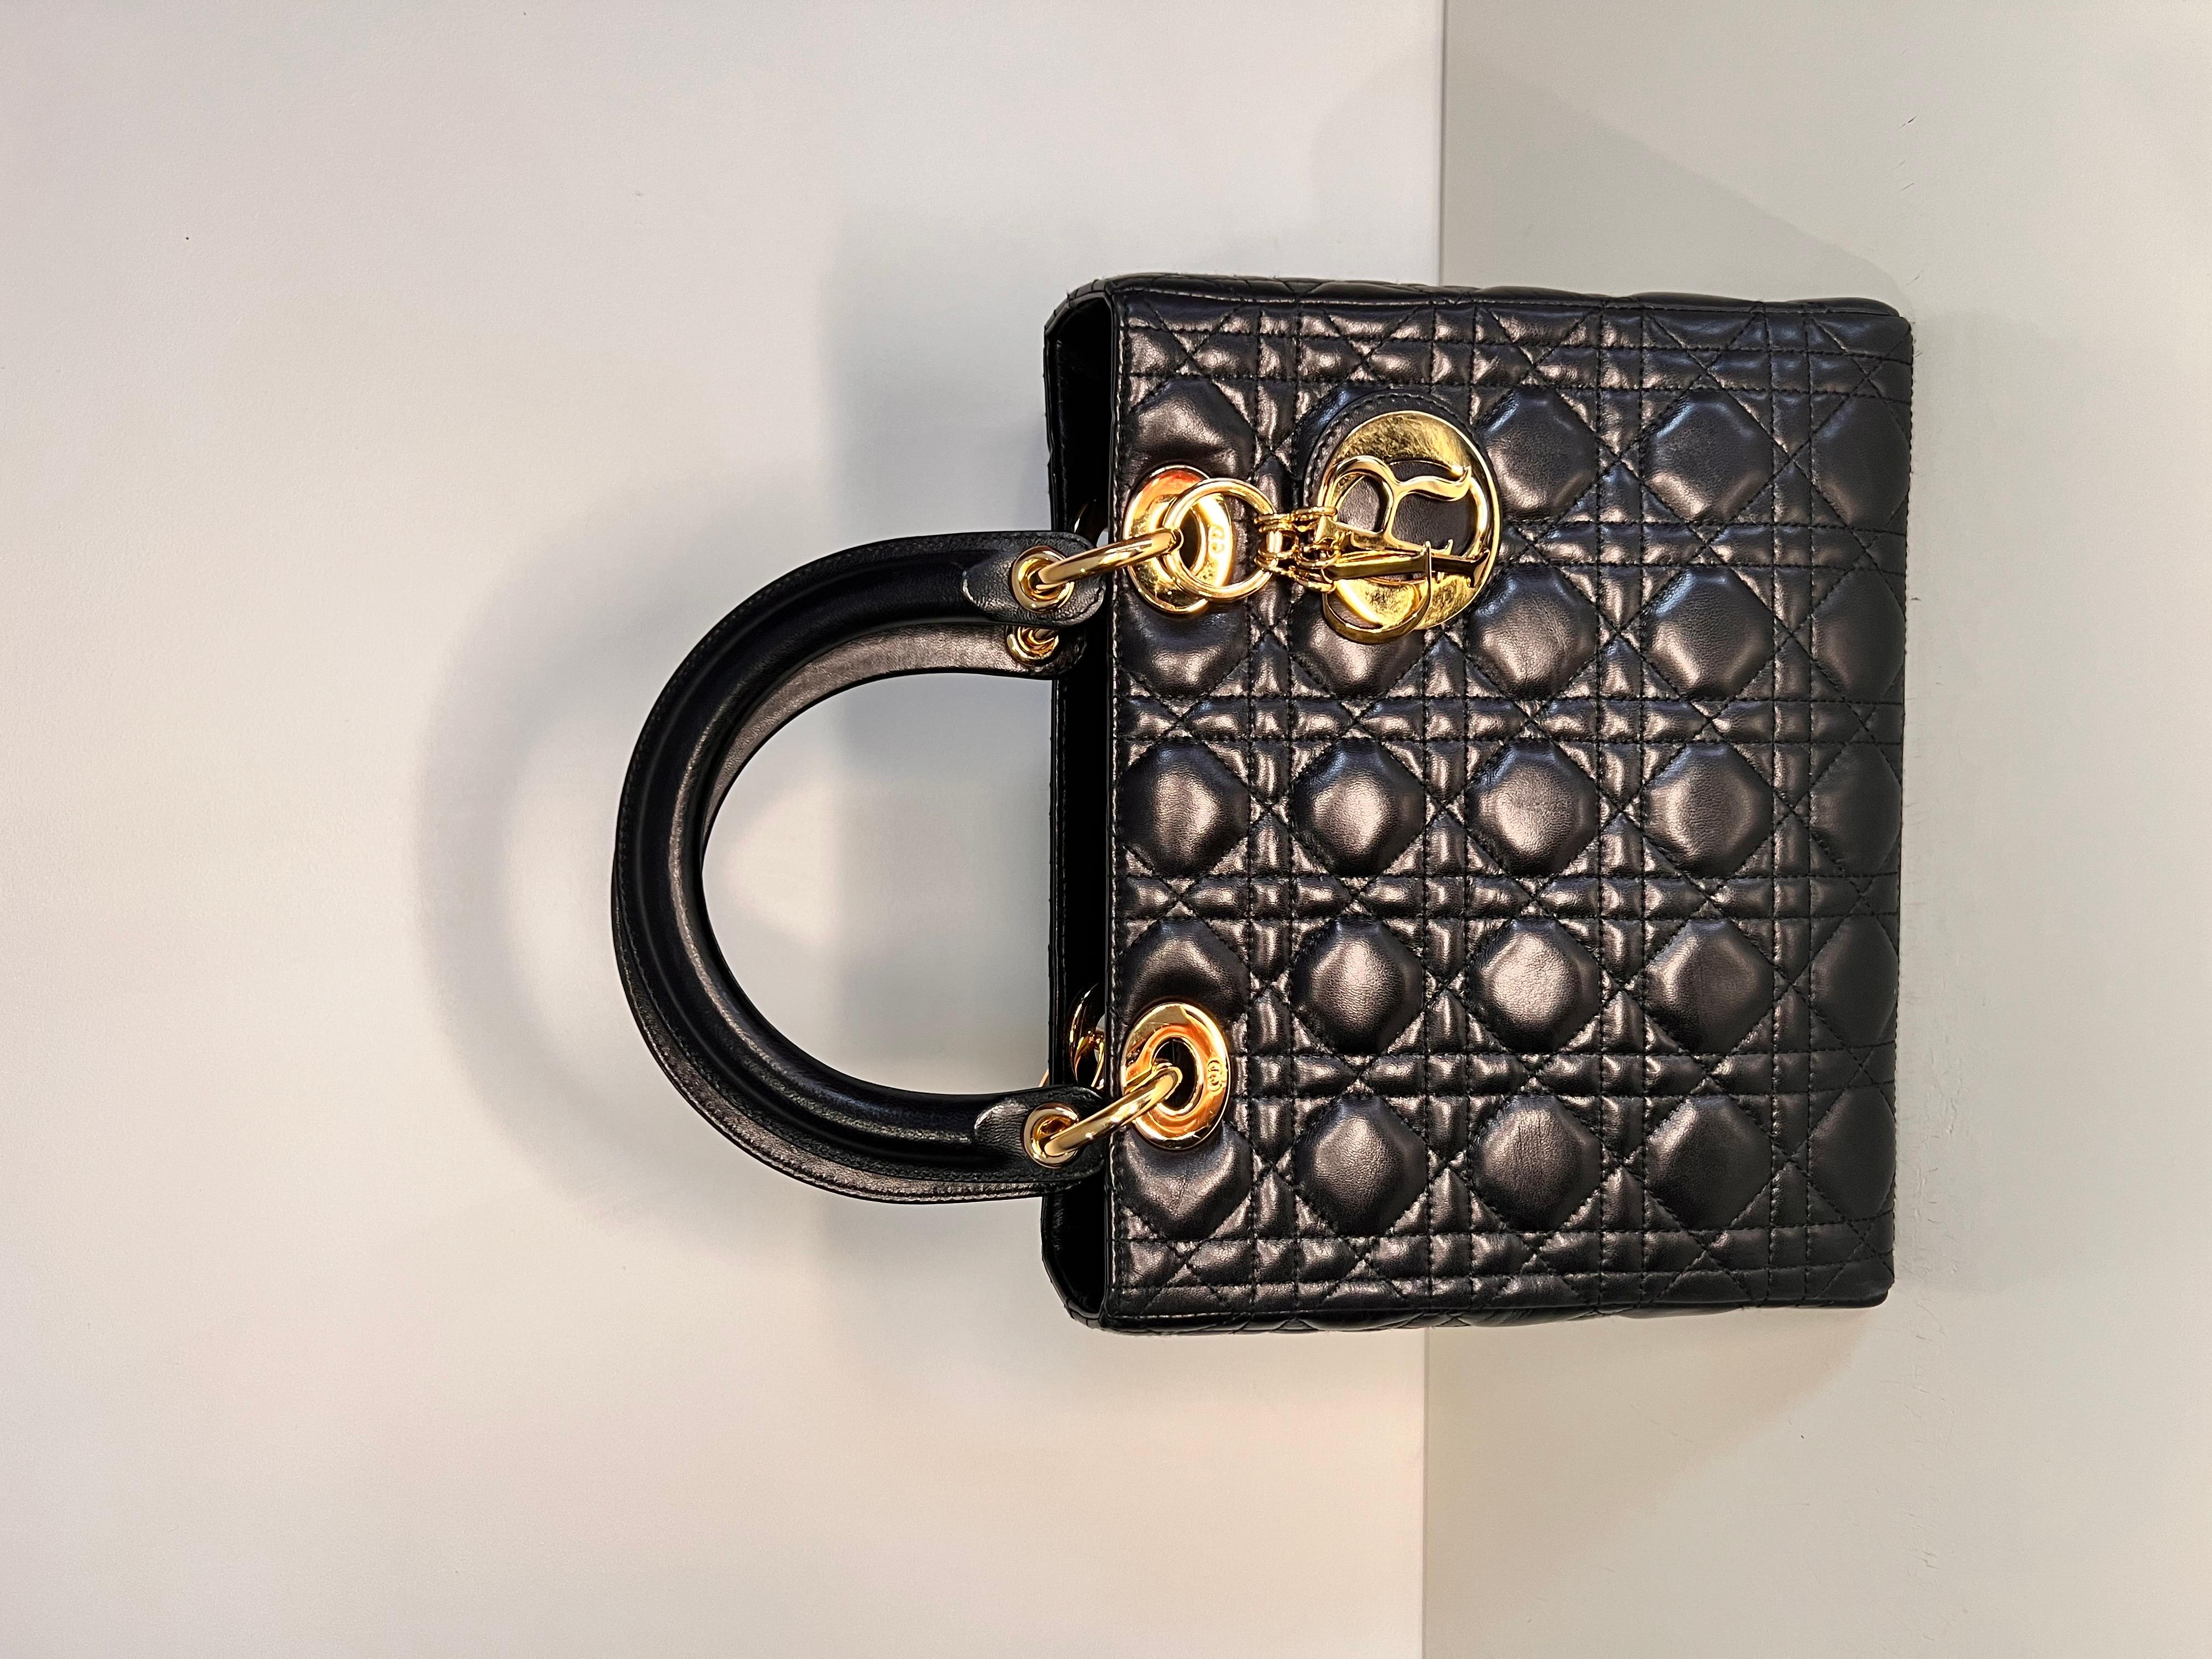 Lady DIOR quilted handbag with gold hardware, famously worn by Princess Diana  10